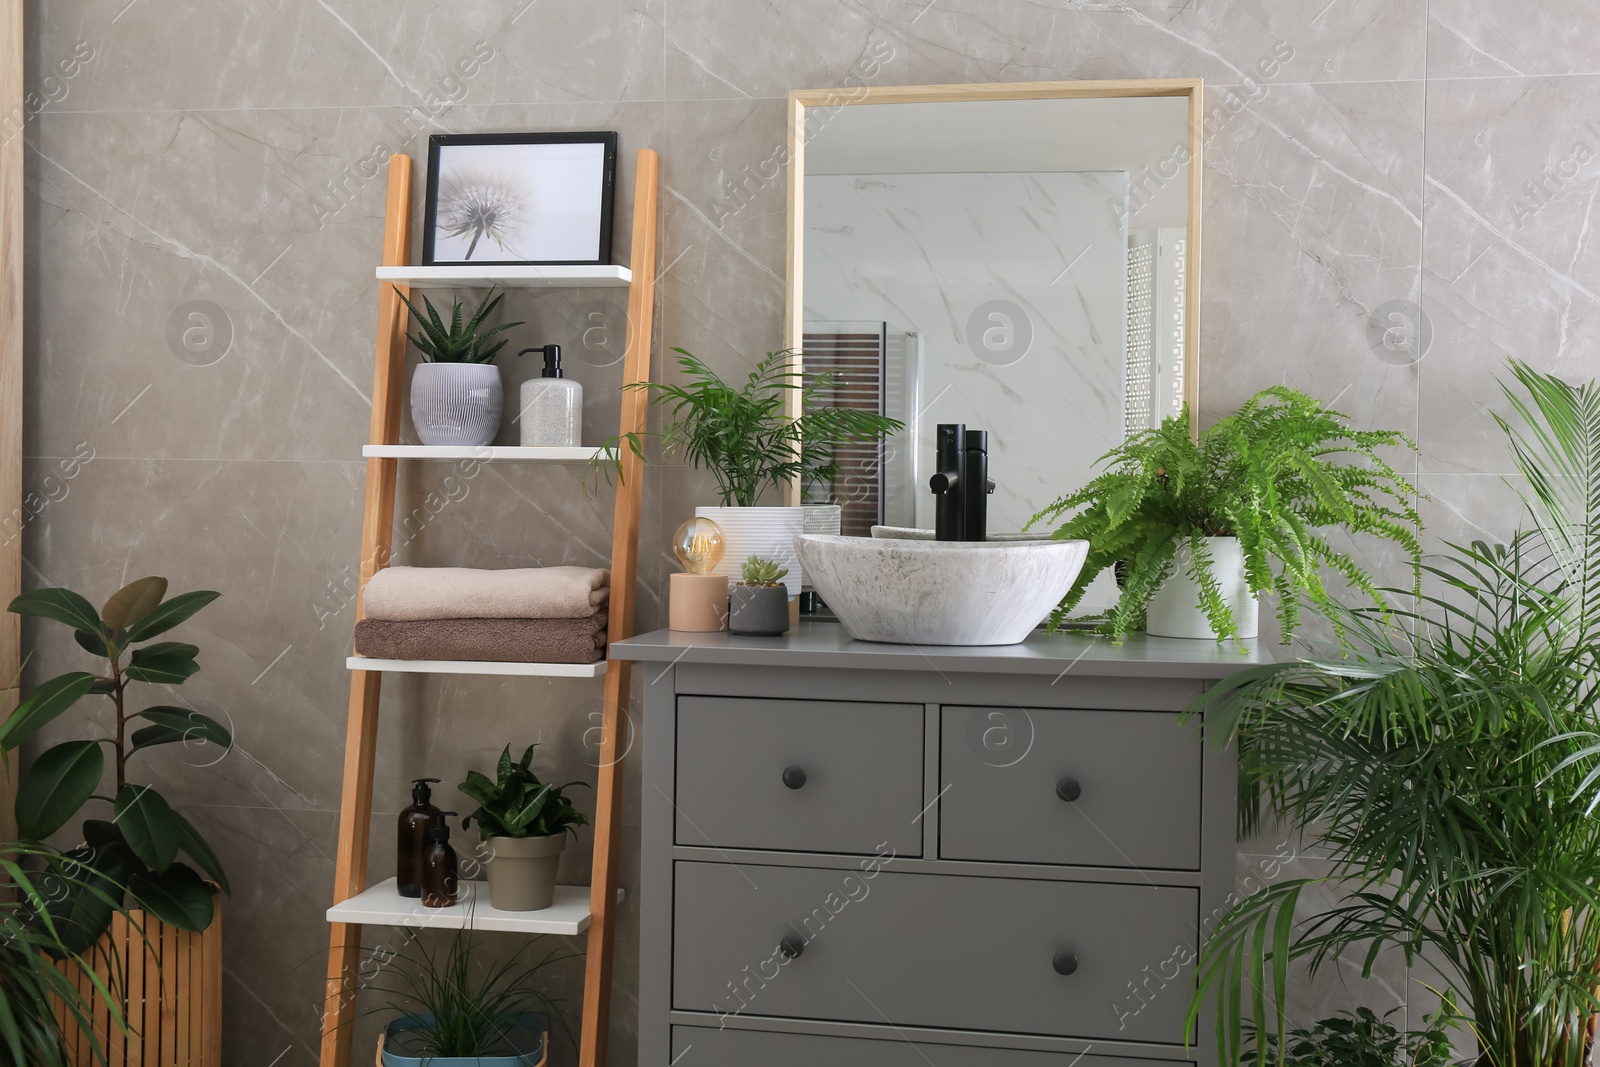 Photo of Modern bathroom interior with stylish vessel sink and beautiful green houseplants